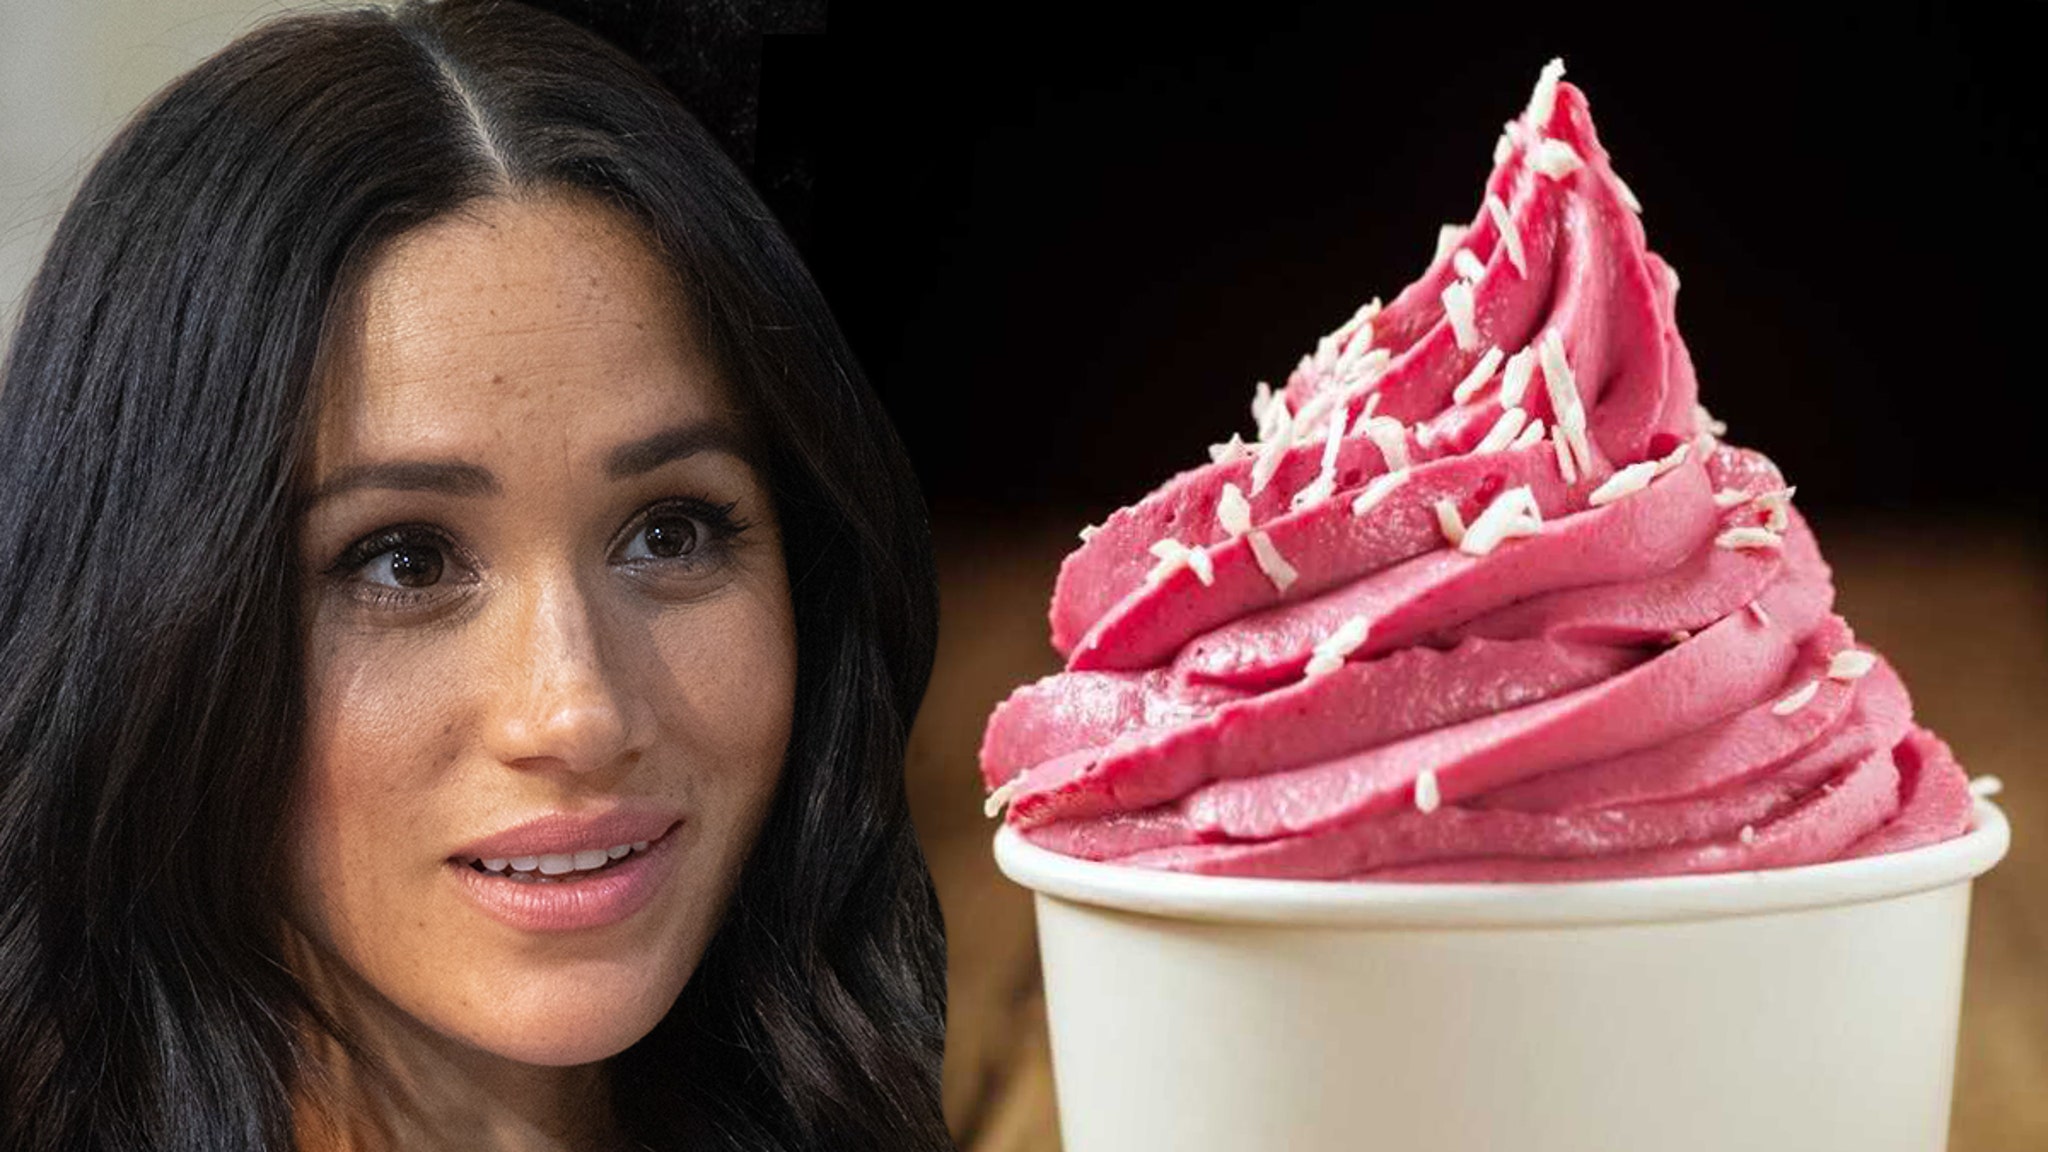 Meghan Markle’s former Froyo store sees the business boom and takes on flavor with Harry